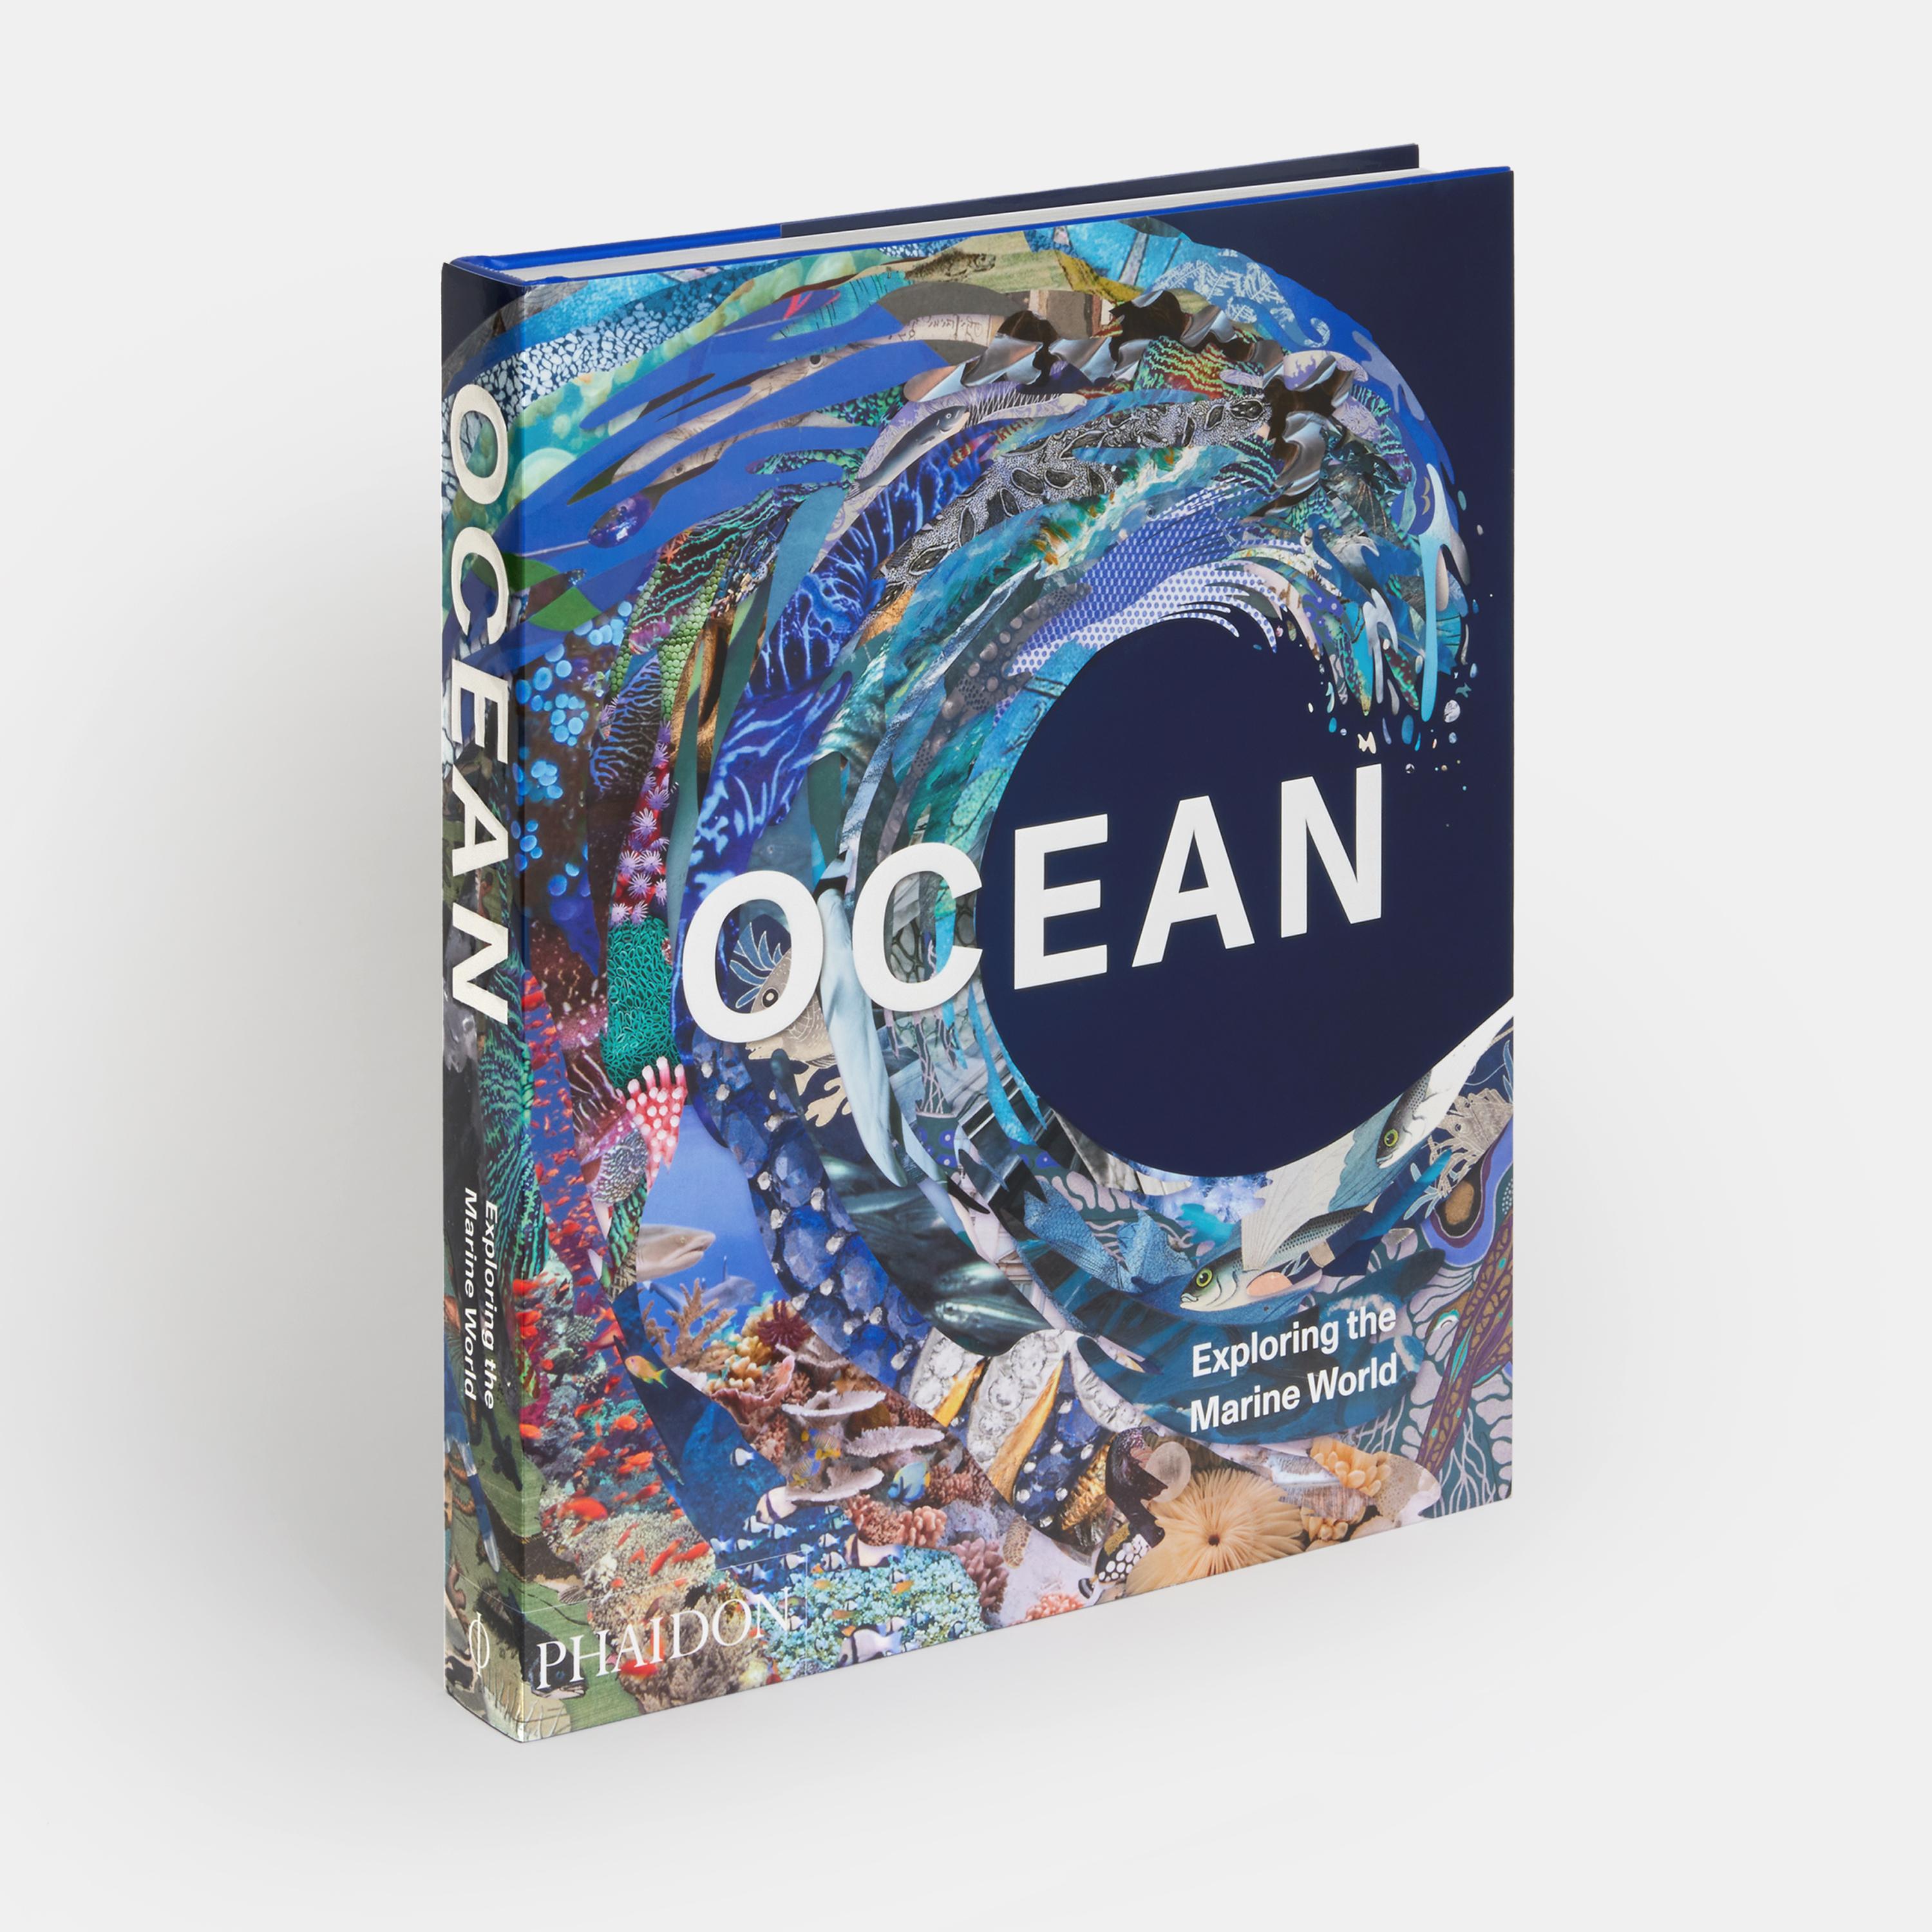 Experience the force, mystery, and beauty of the ocean and seas through more than 300 images - featuring underwater photography, oceanographic maps and scientific illustrations, as well as paintings, sculptures and popular films.

Oceanography and